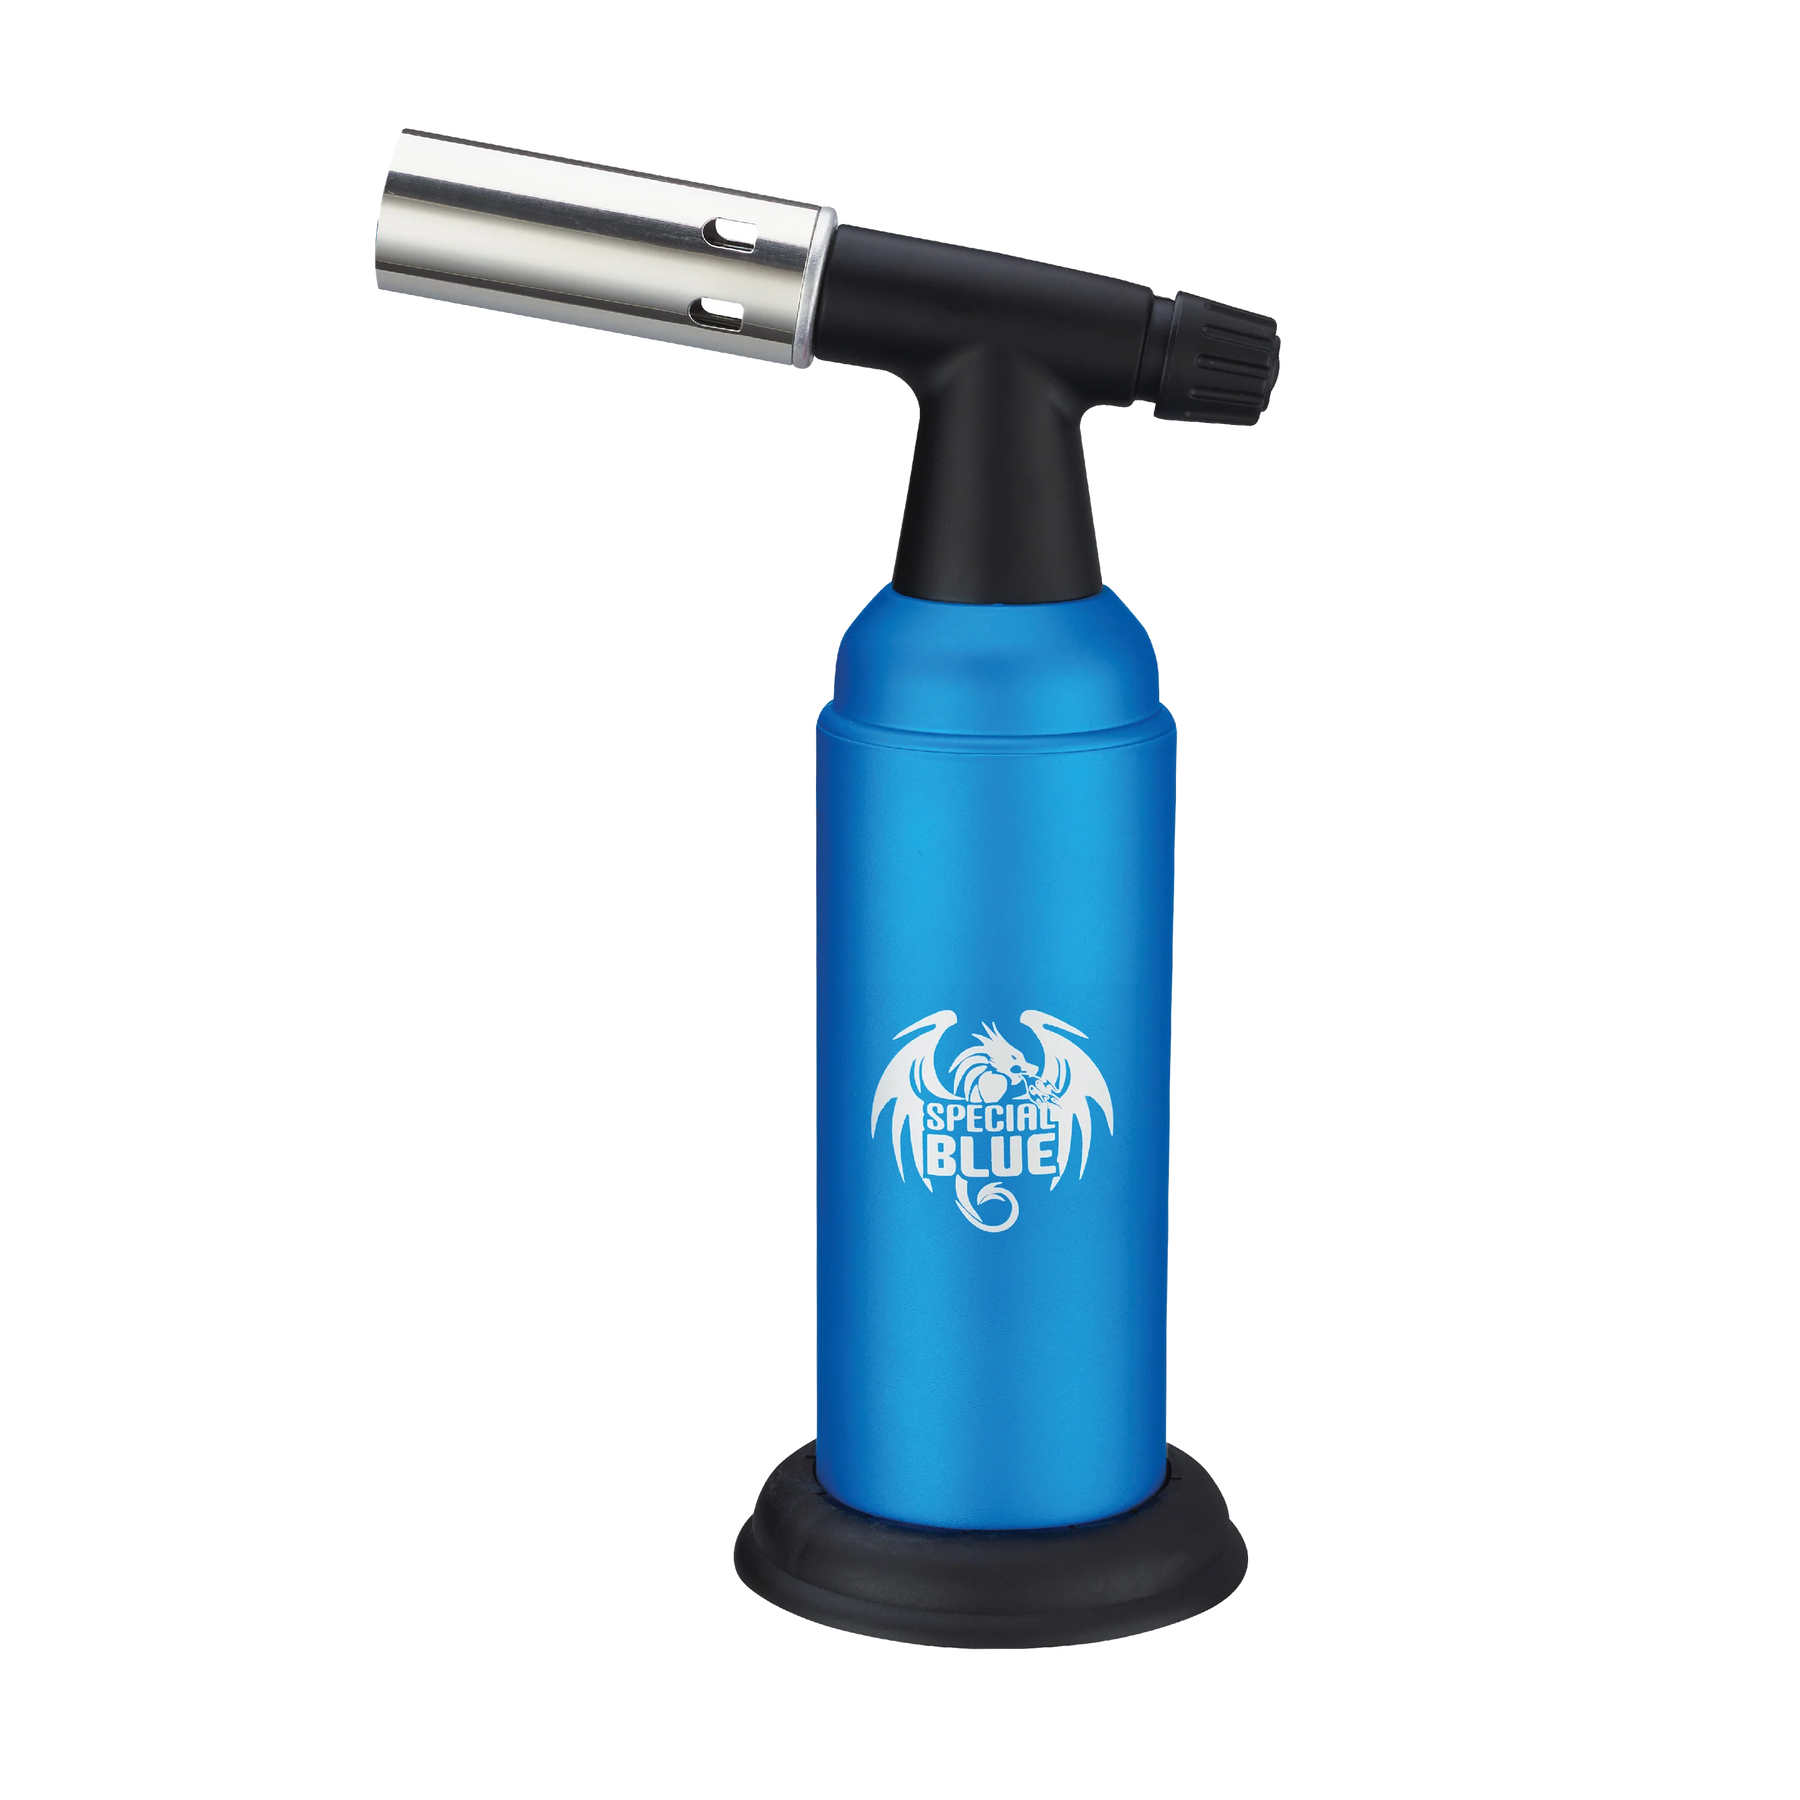 Special Blue Monster - Monster Pro - Torch